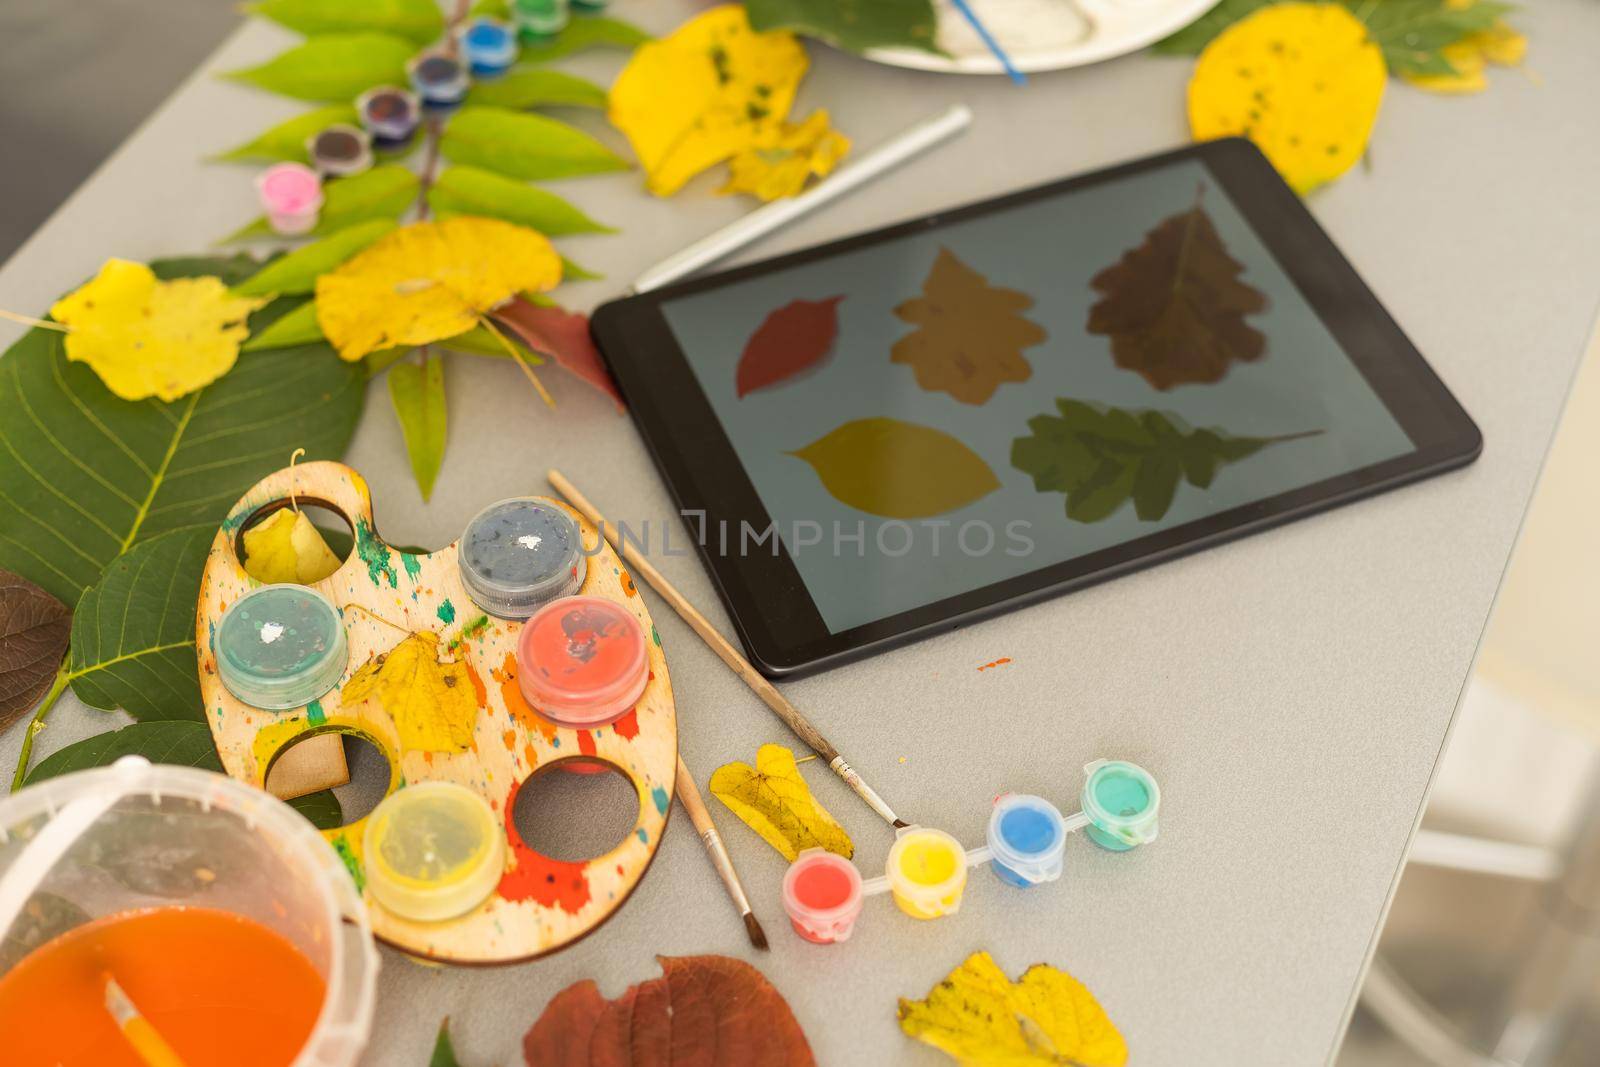 Tablet hot tea checkered blanket apples and autumn leaves on old wooden background Vintage tonning Autumn concept mock up. High quality photo